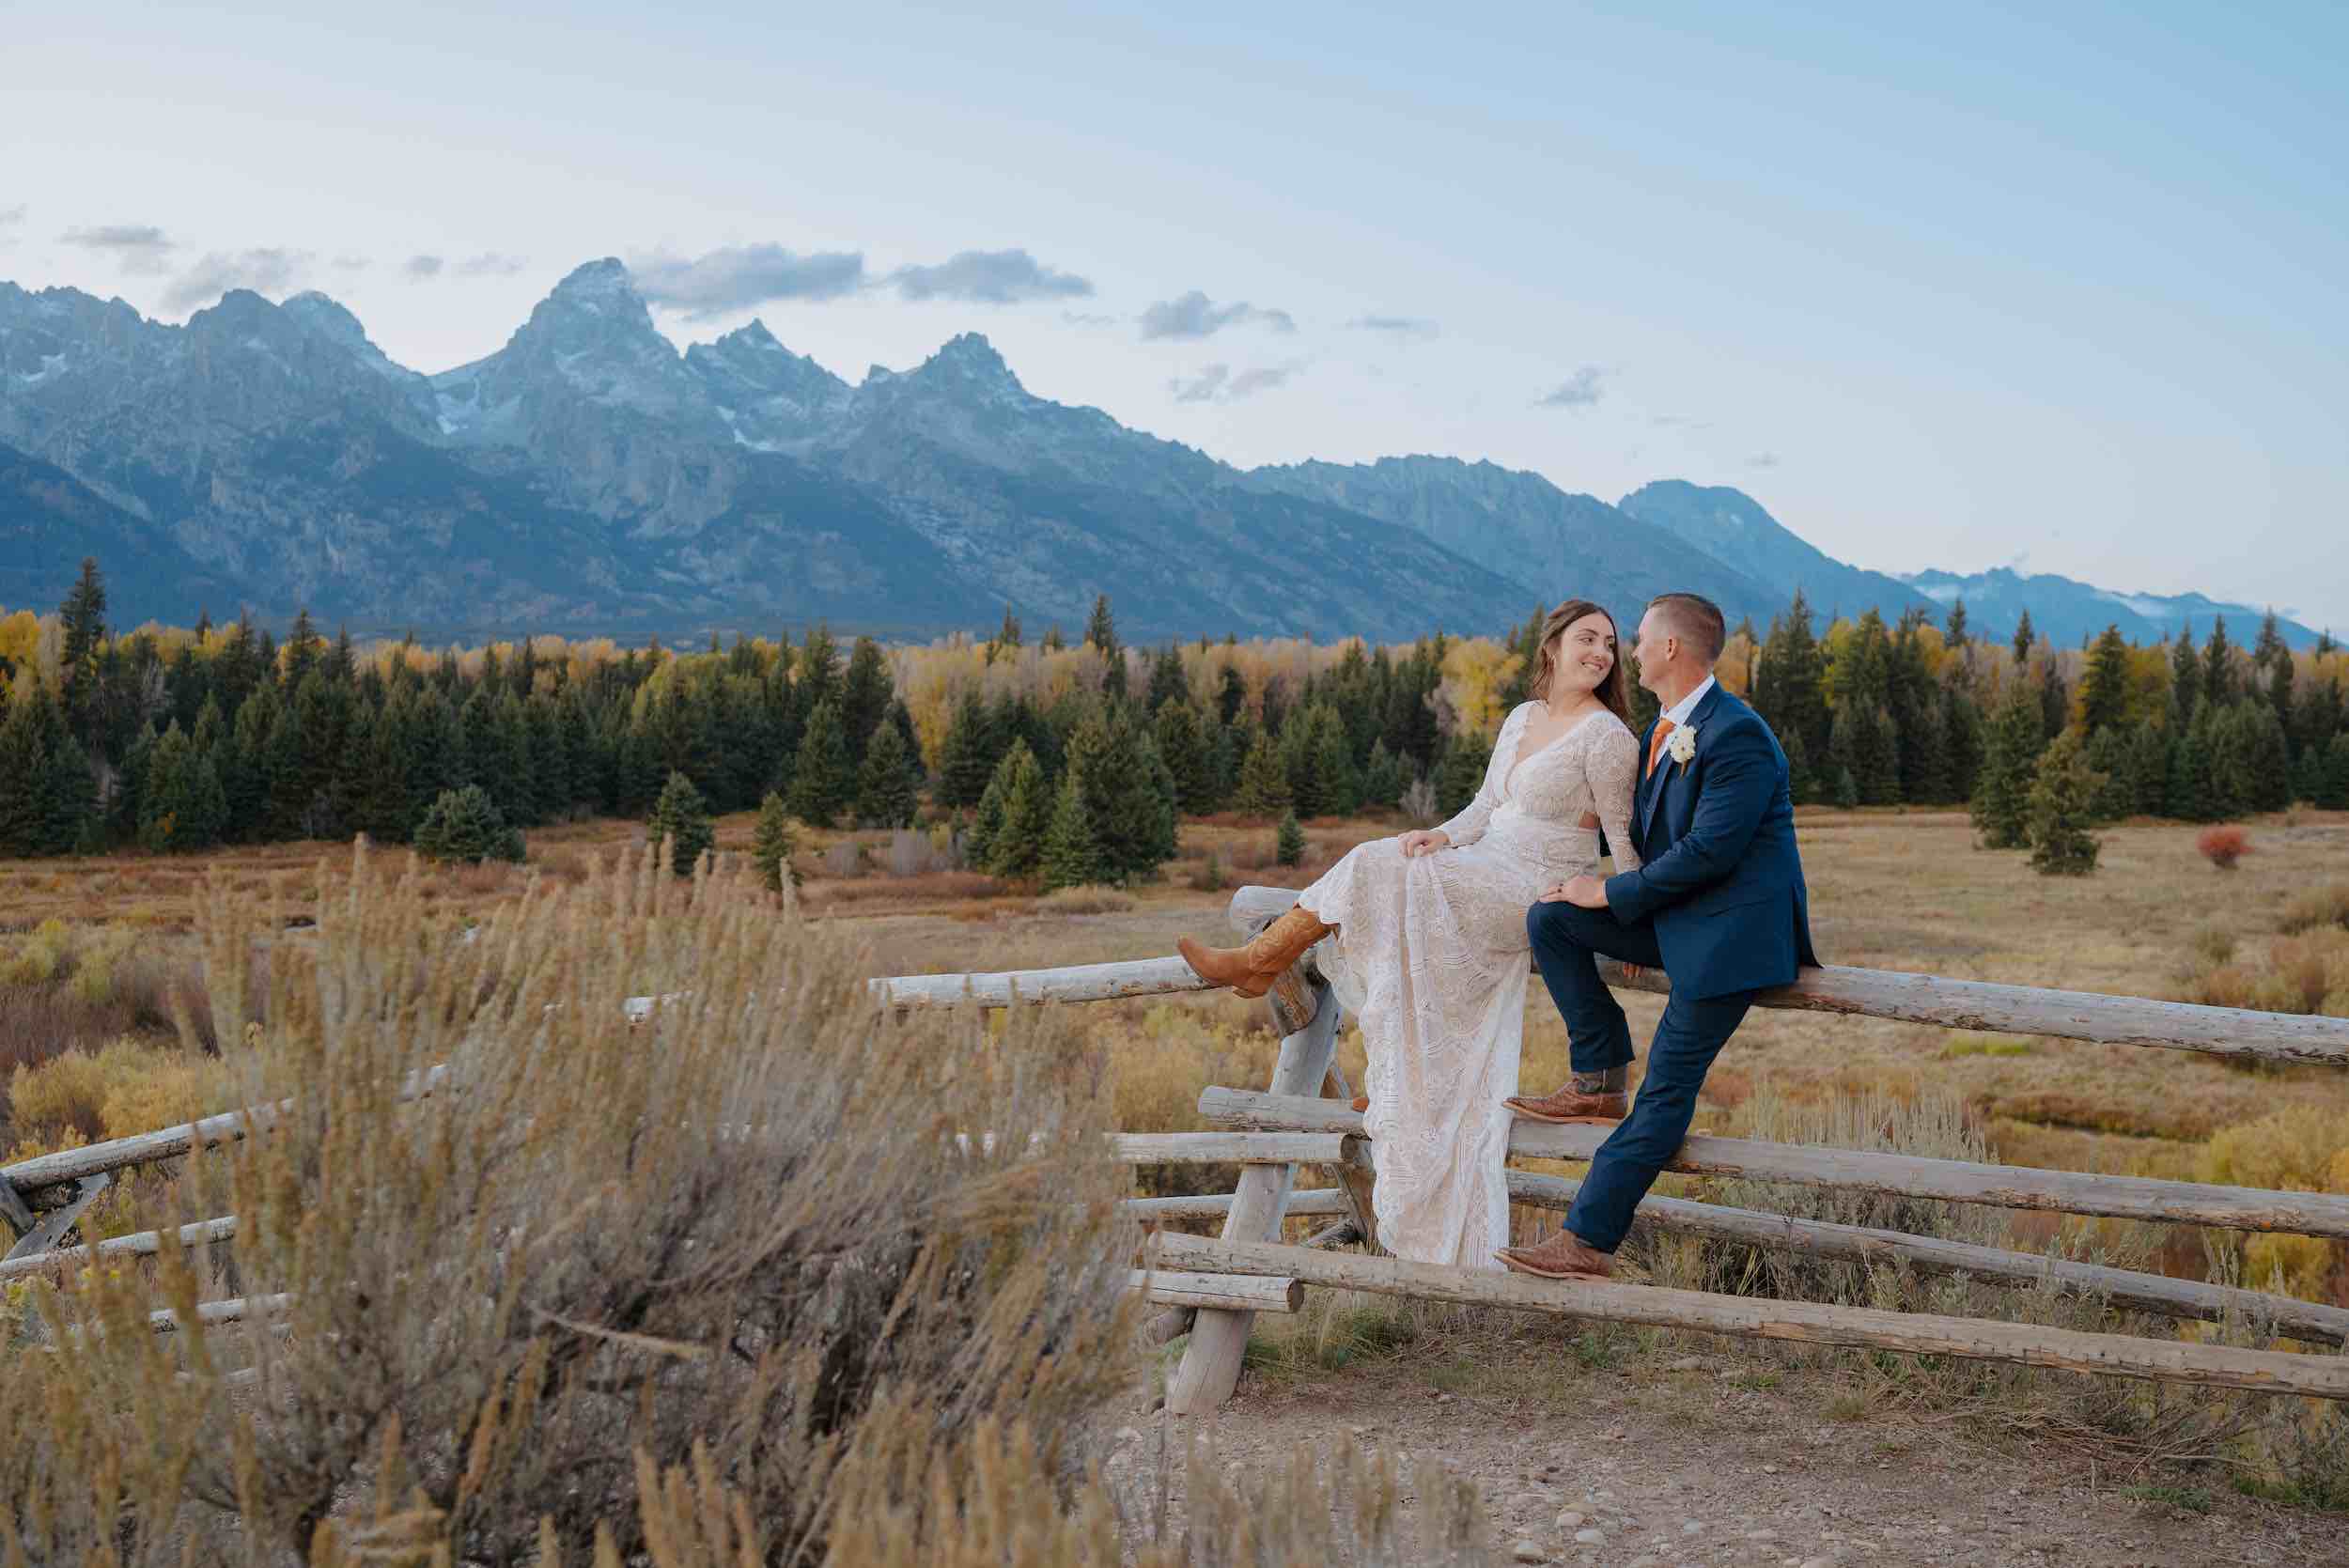 Grand Teton National Park Elopement: Alyssa and Tim share a tender moment with stunning panoramic views as their backdrop.